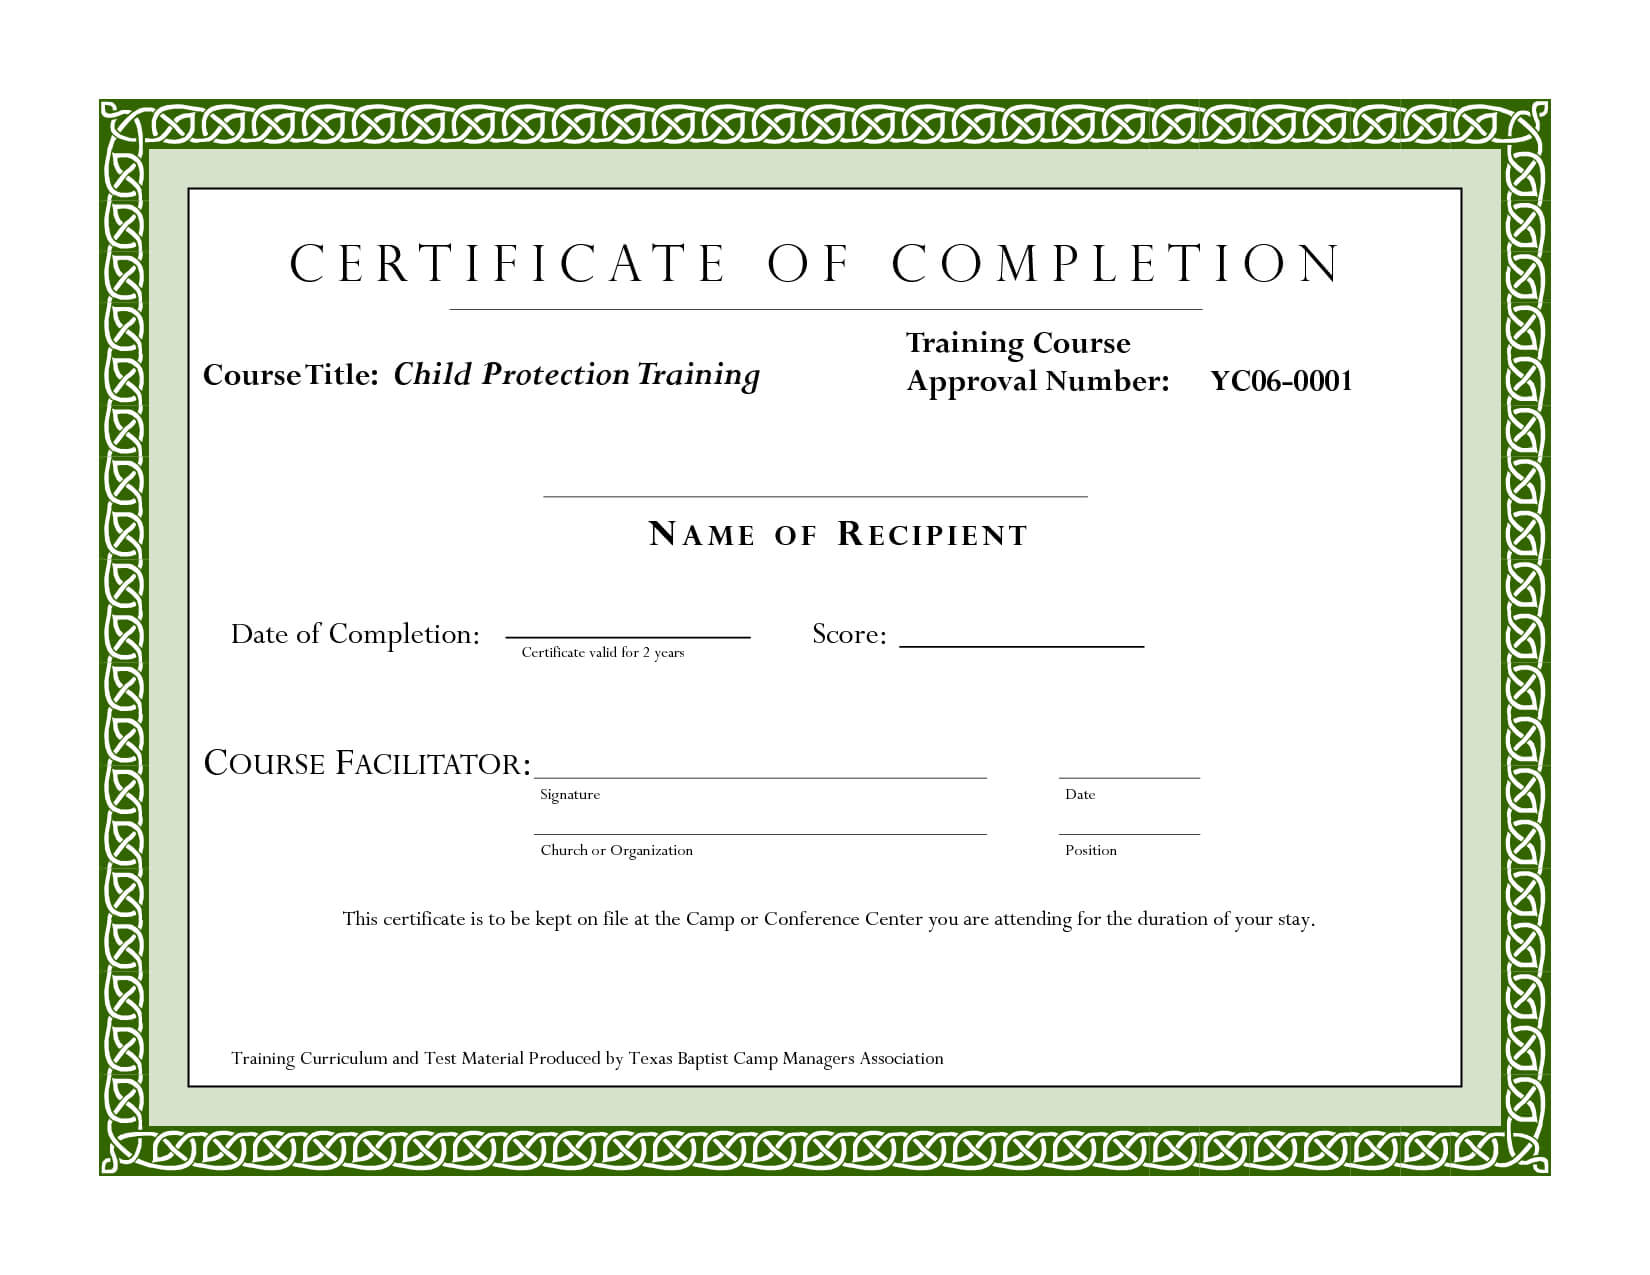 Course Completion Certificate Template | Certificate Of With Regard To Walking Certificate Templates